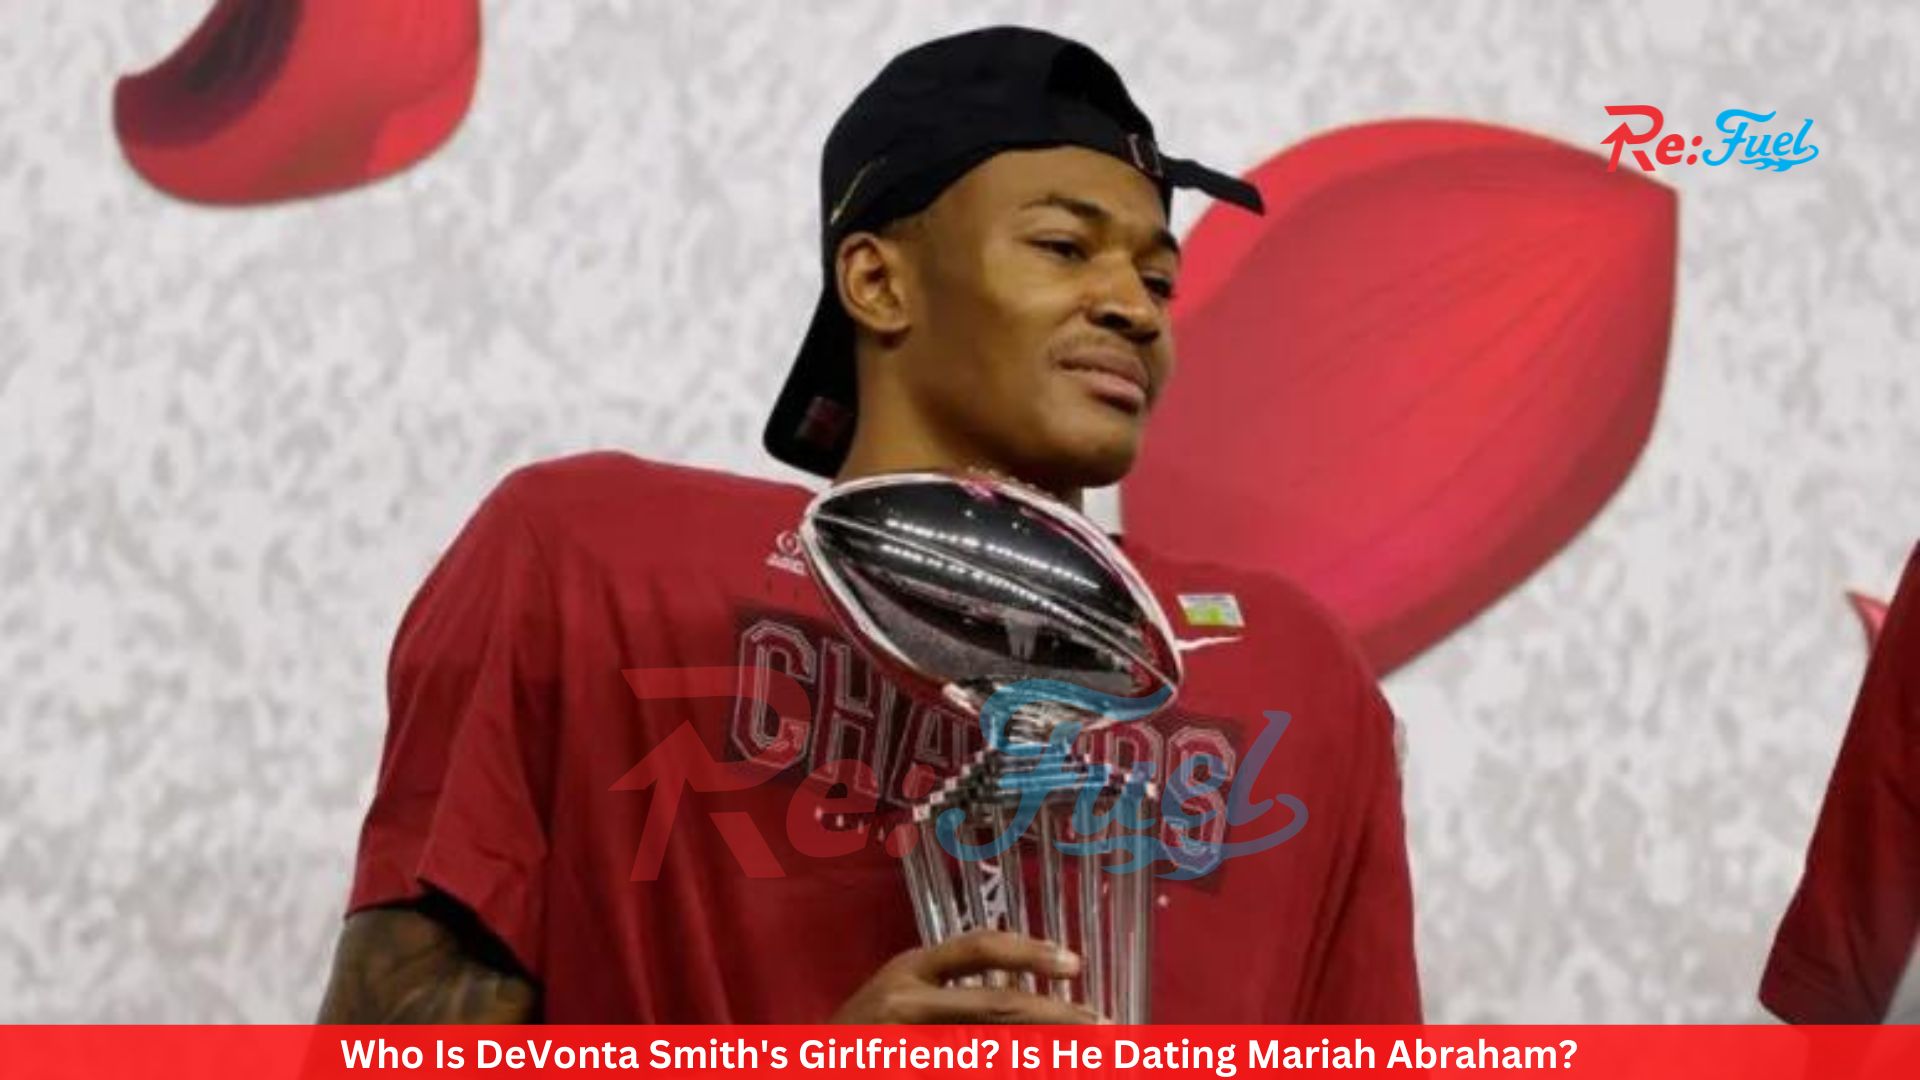 Who Is DeVonta Smith's Girlfriend? Is He Dating Mariah Abraham?